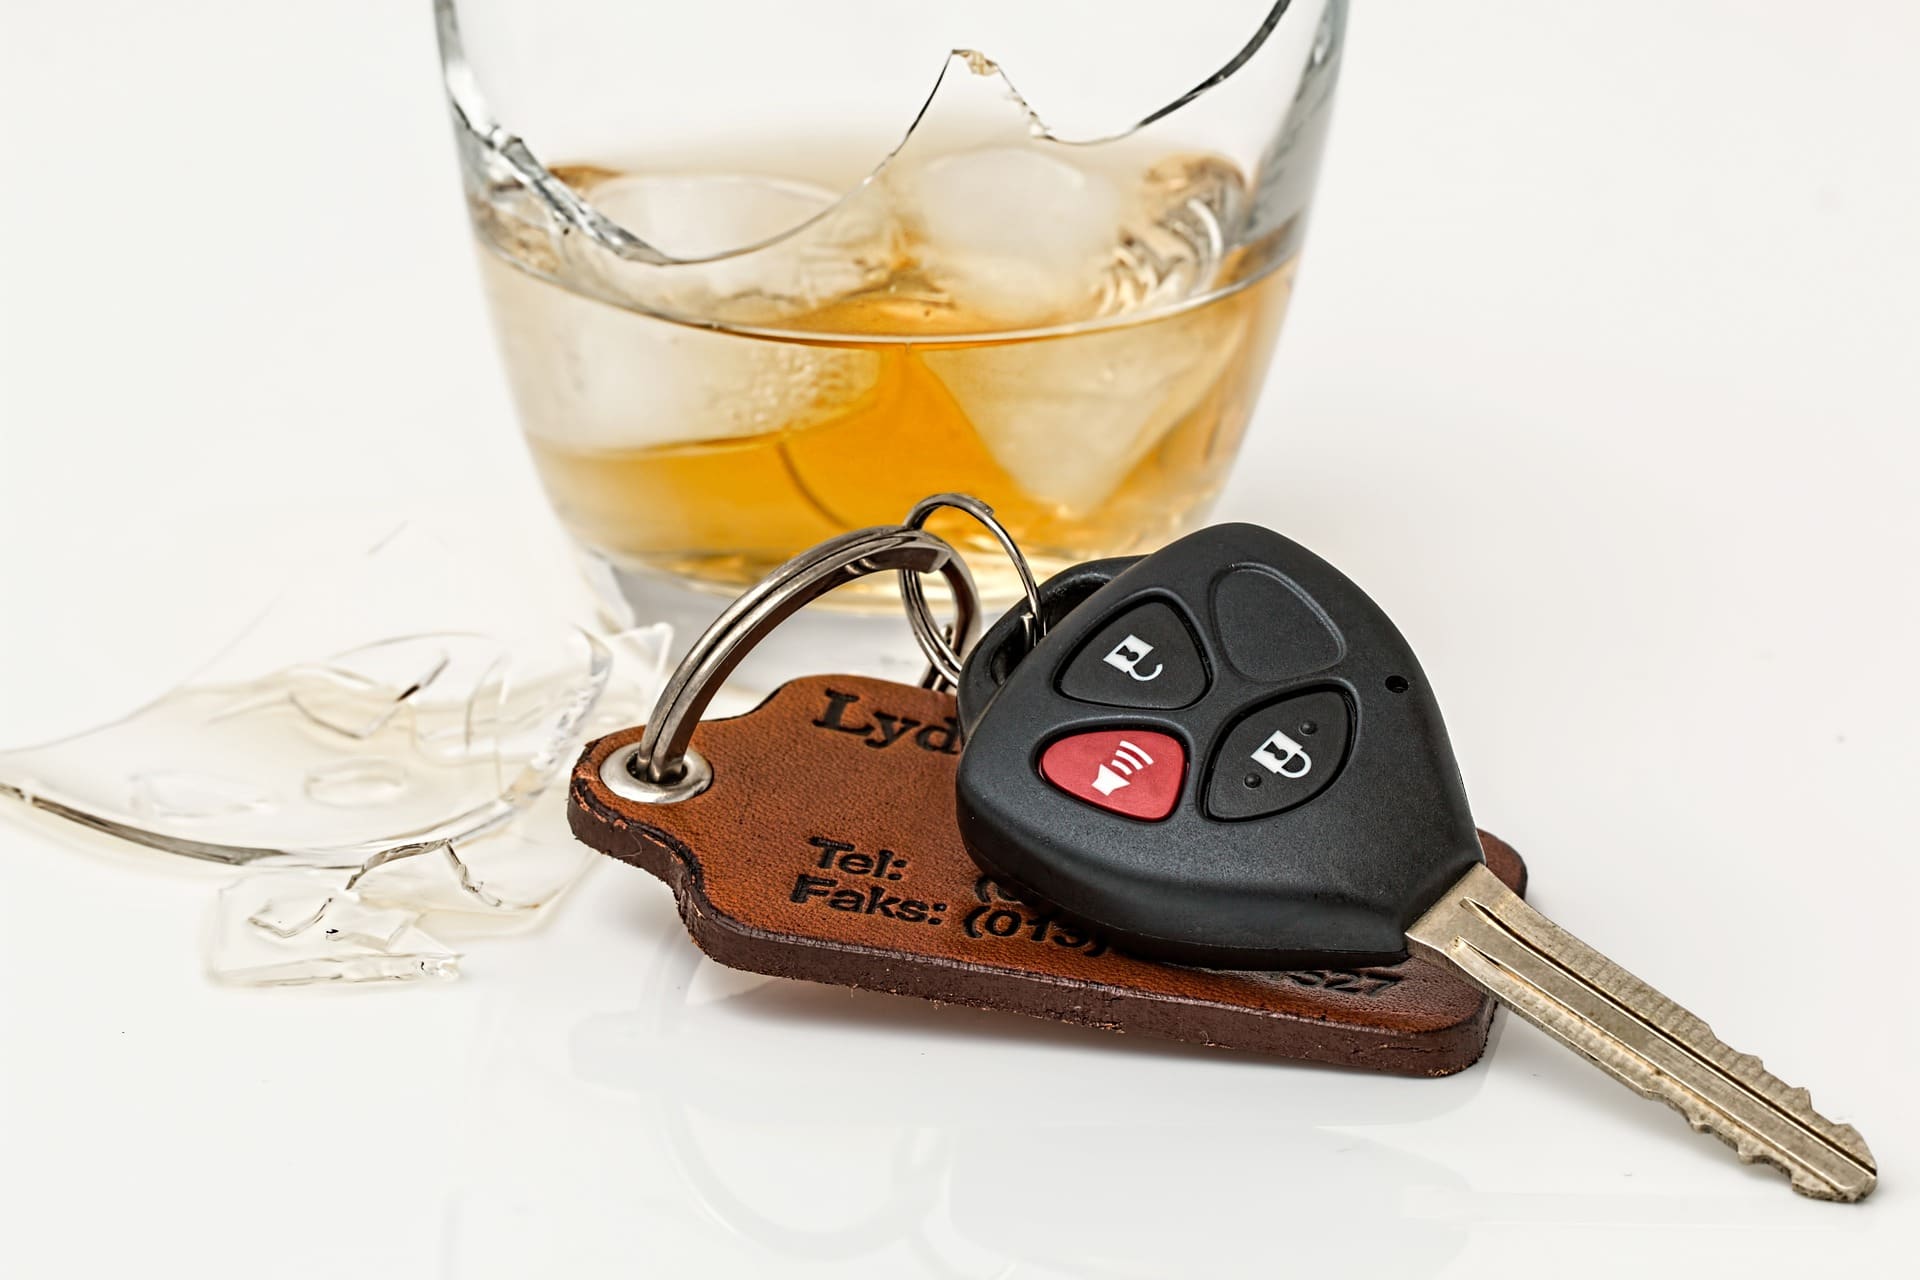 http://smithtapper.com.au/traffic-lawyers/drink-driving-lawyers/